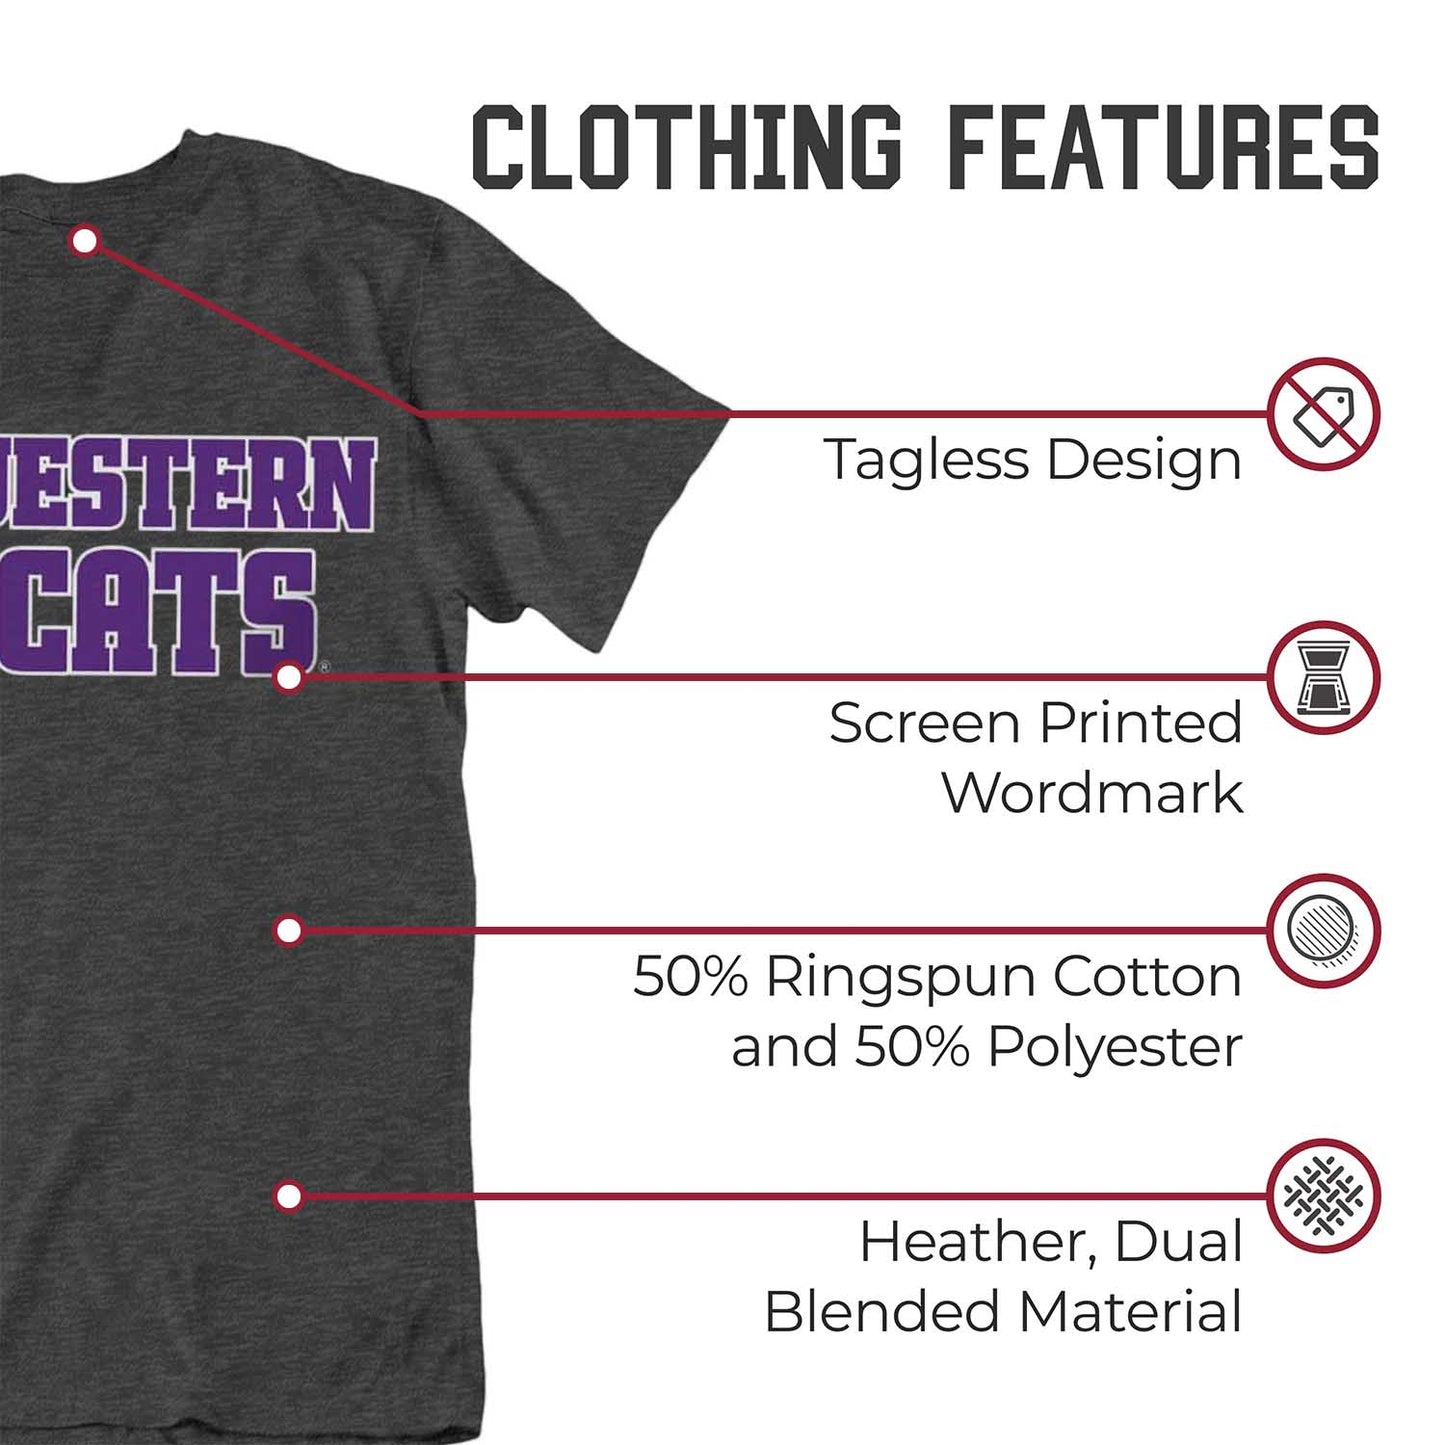 Northwestern Wildcats Campus Colors NCAA Adult Cotton Blend Charcoal Tagless T-Shirt - Charcoal